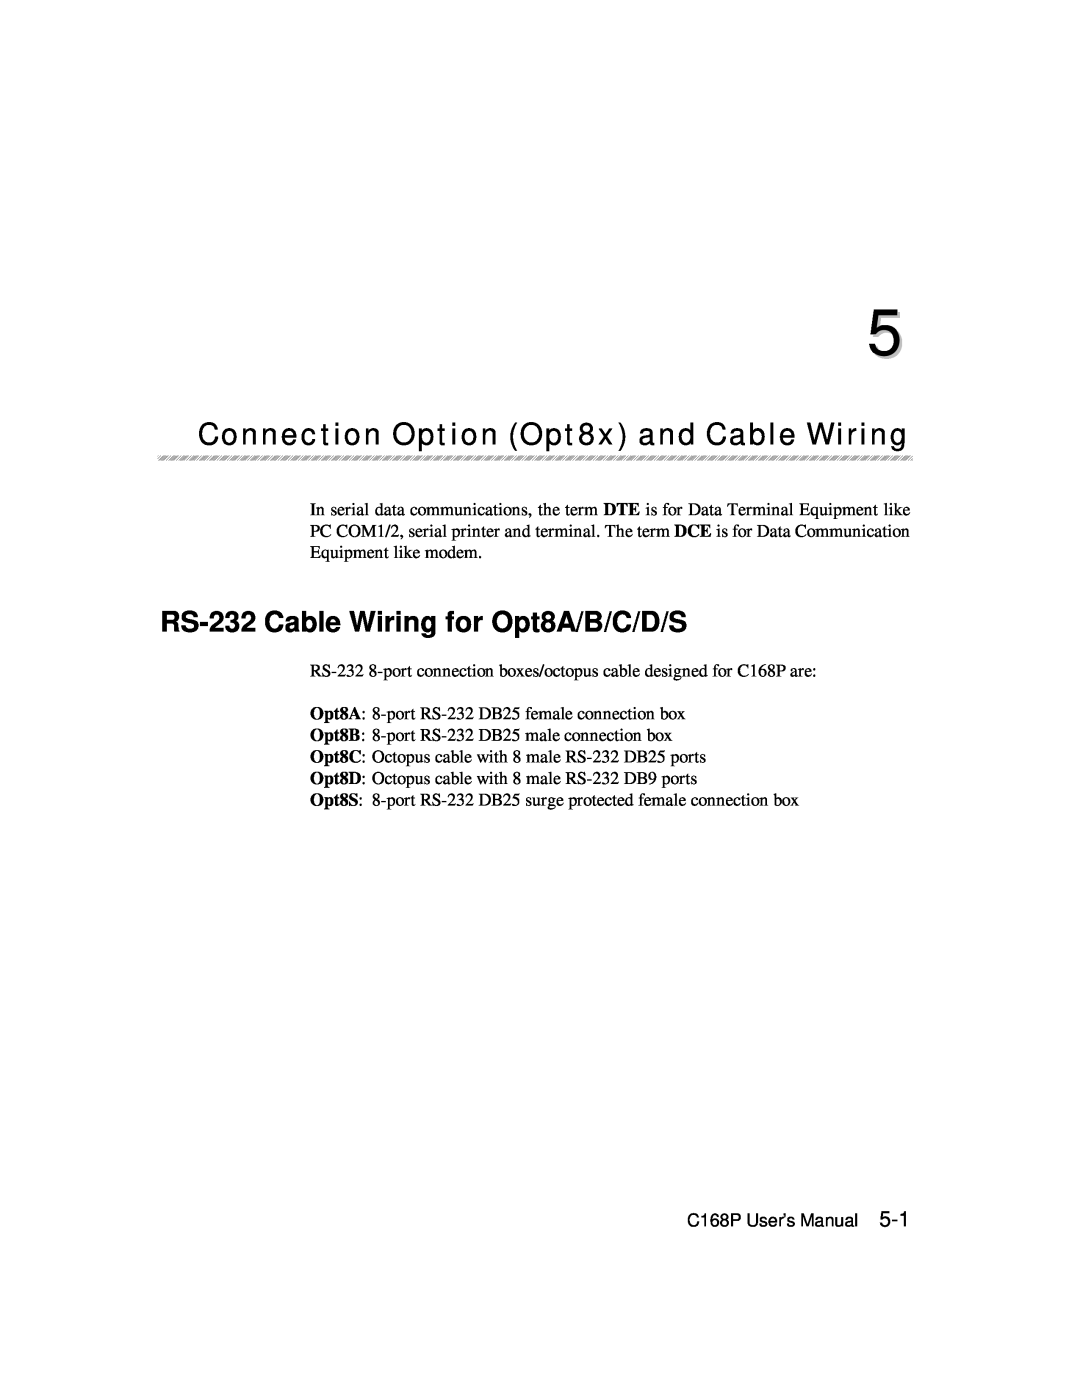 Moxa Technologies C168P user manual RS-232 Cable Wiring for Opt8A/B/C/D/S, Connection Option Opt8x and Cable Wiring 